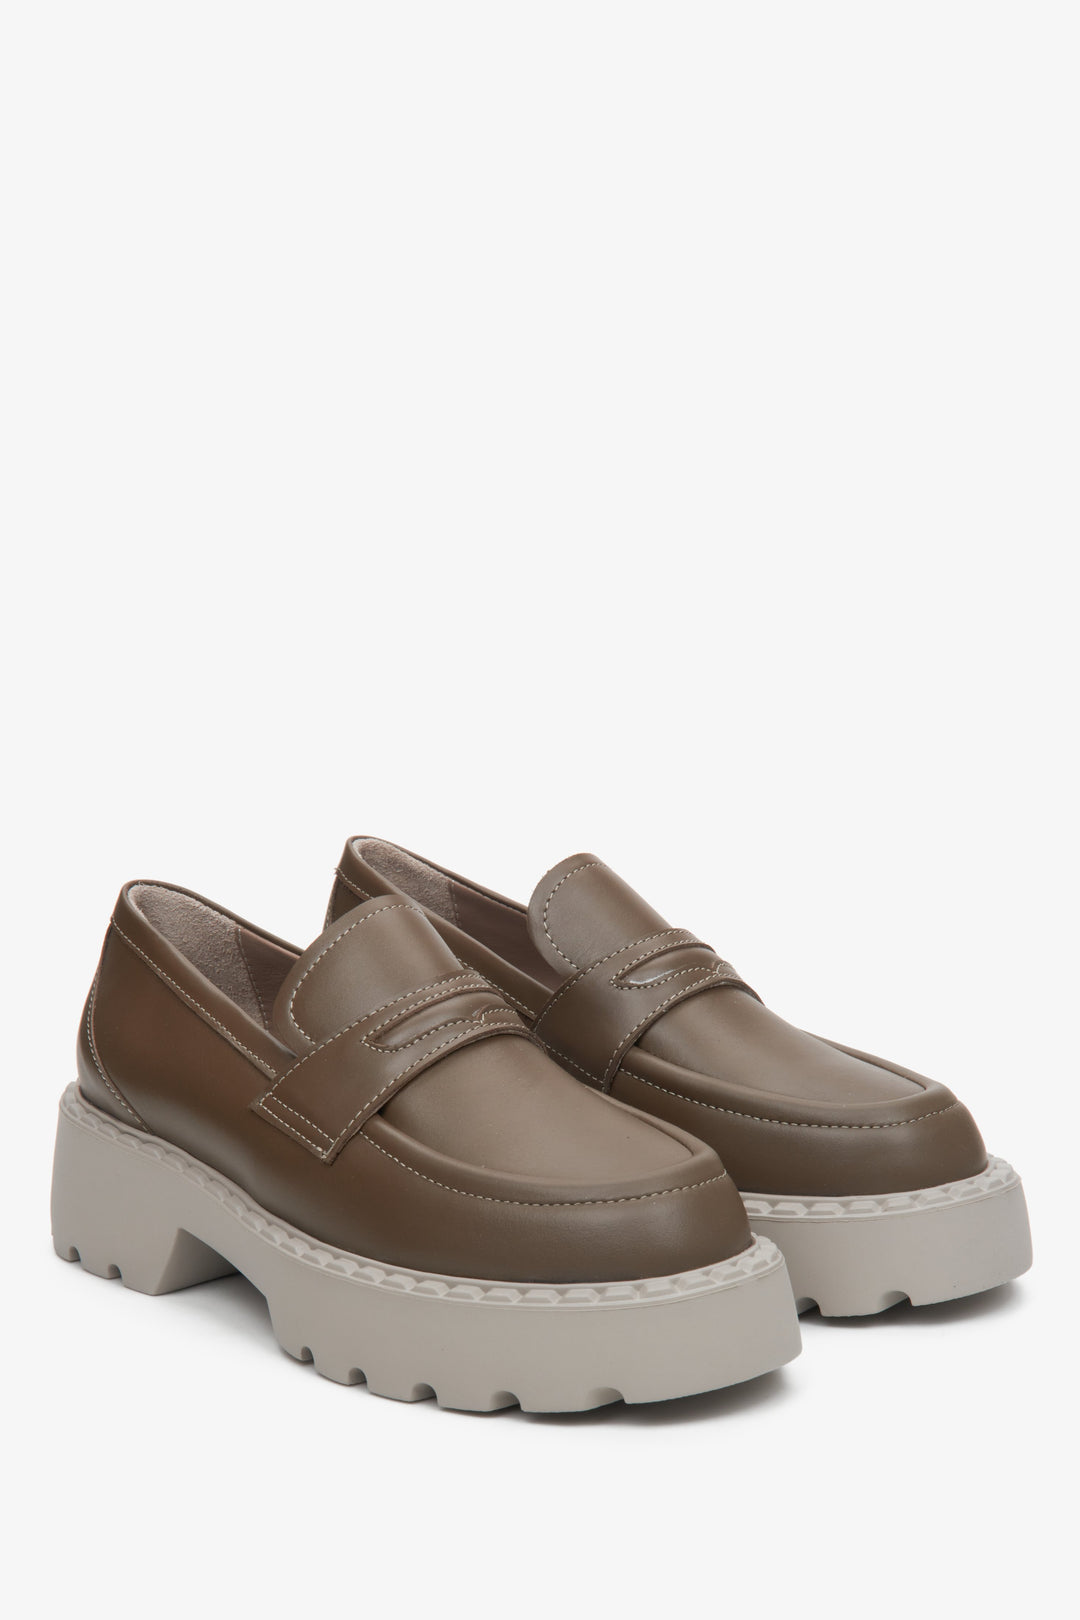 Stylish brown leather moccasins - displaying the shoes from the reverse angle.